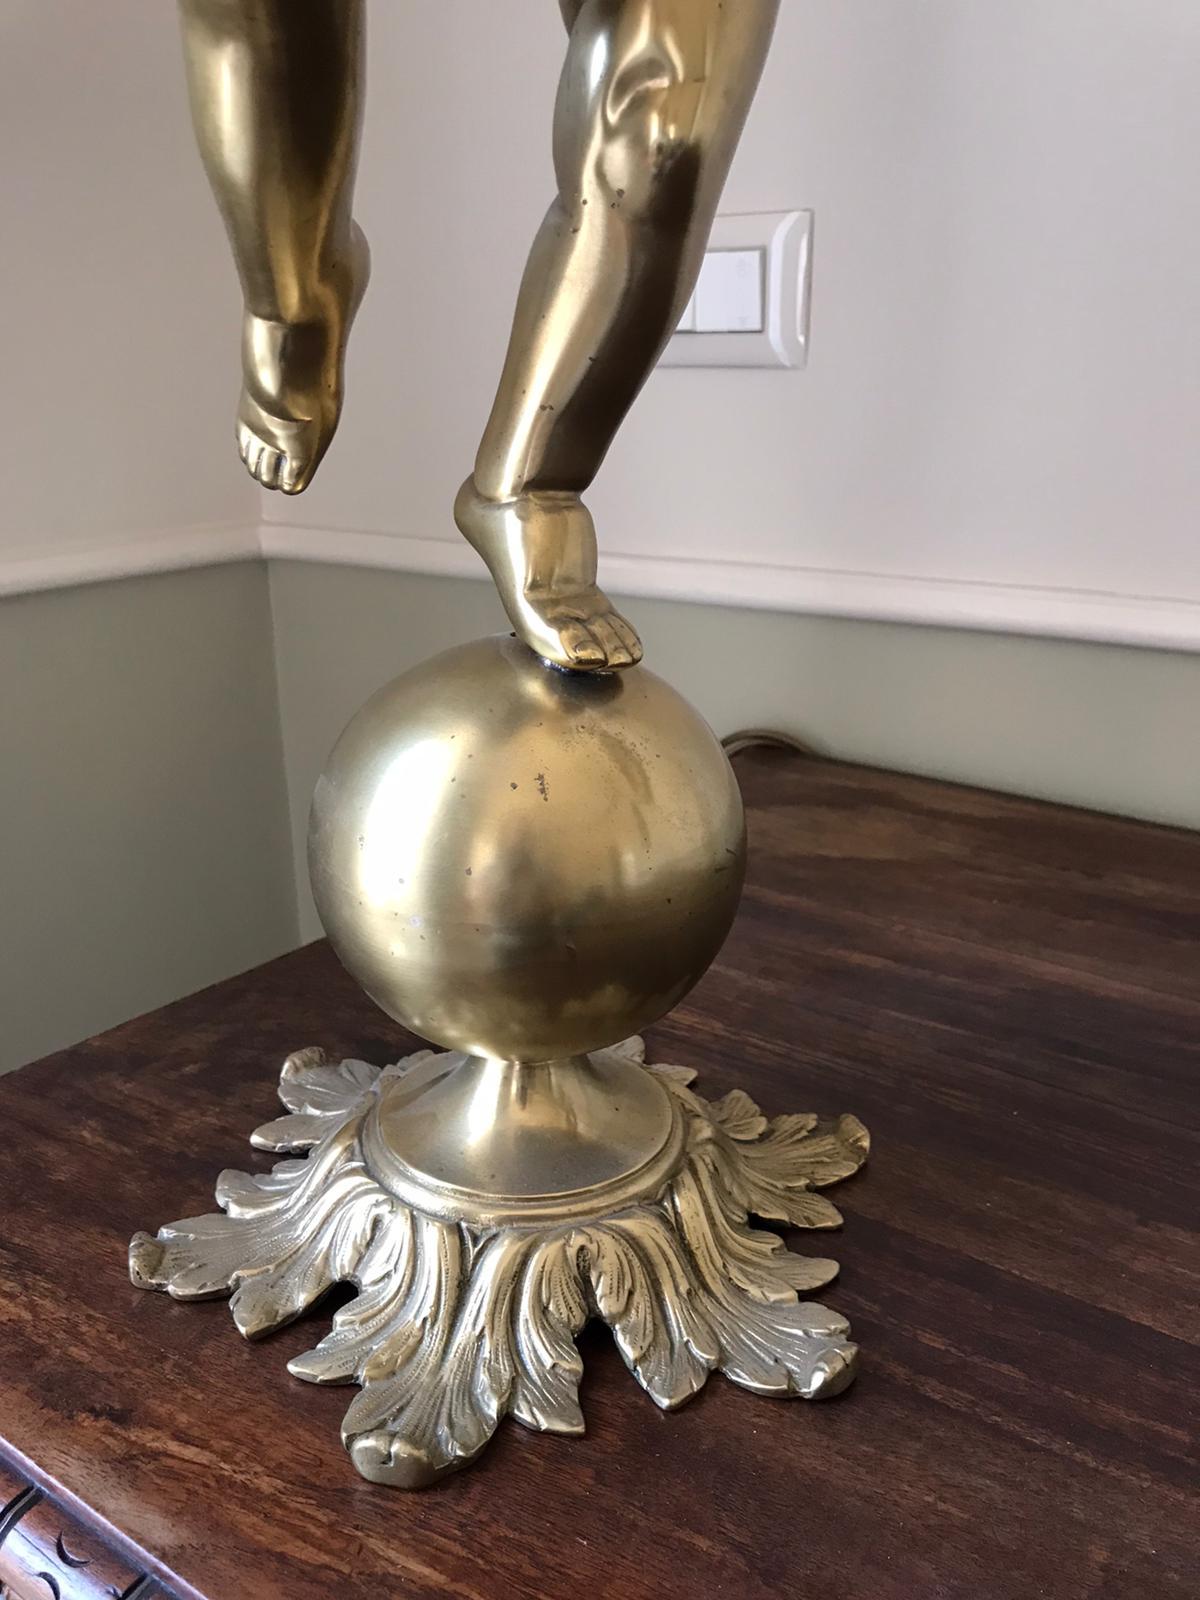 Elegant Italian Cherub statue in bronze holding a  with five arms chandelier  adorned by crystal drops 
** in excellent vintage condition
* the shades are new